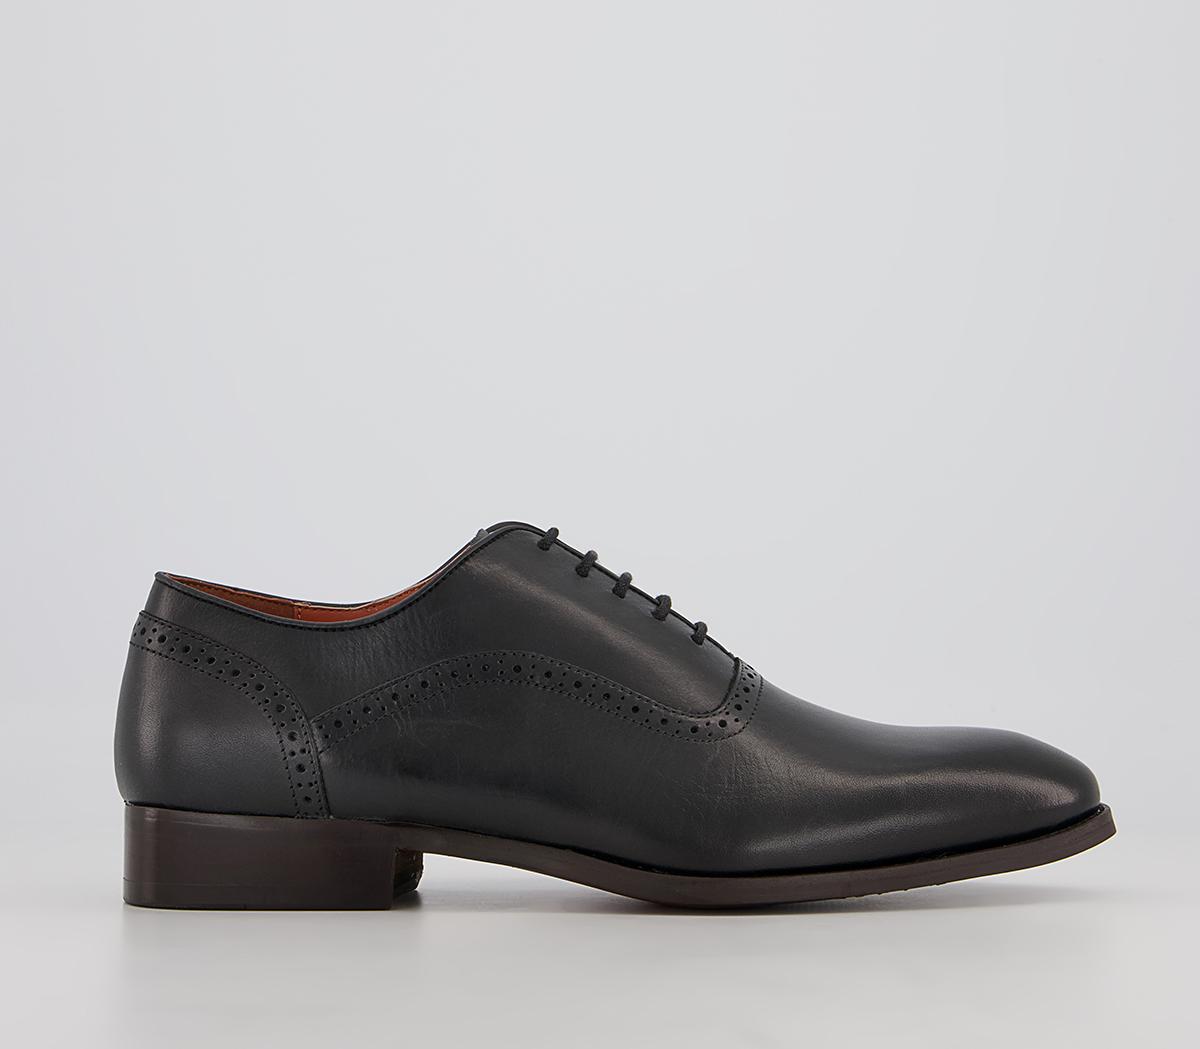 OfficeMarefield Plain Toe Oxford ShoesBlack Leather